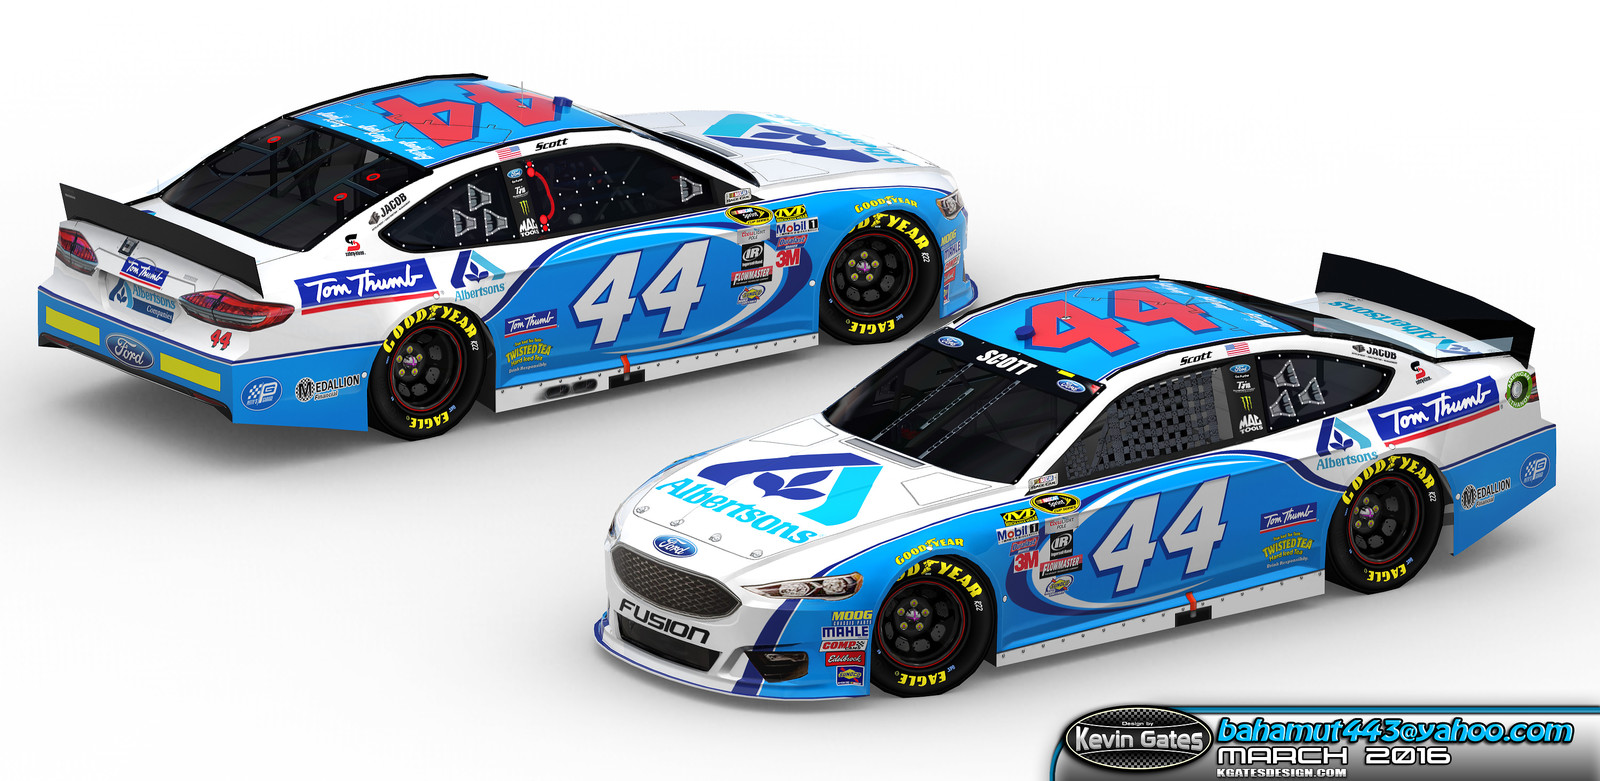 Original Autodesk 3DS Max render of the finalized 2016 #44 Albertsons / Tom Thumb Ford Fusion driven by NASCAR Sprint Cup Series driver Brian Scott of Richard Petty Motorsports